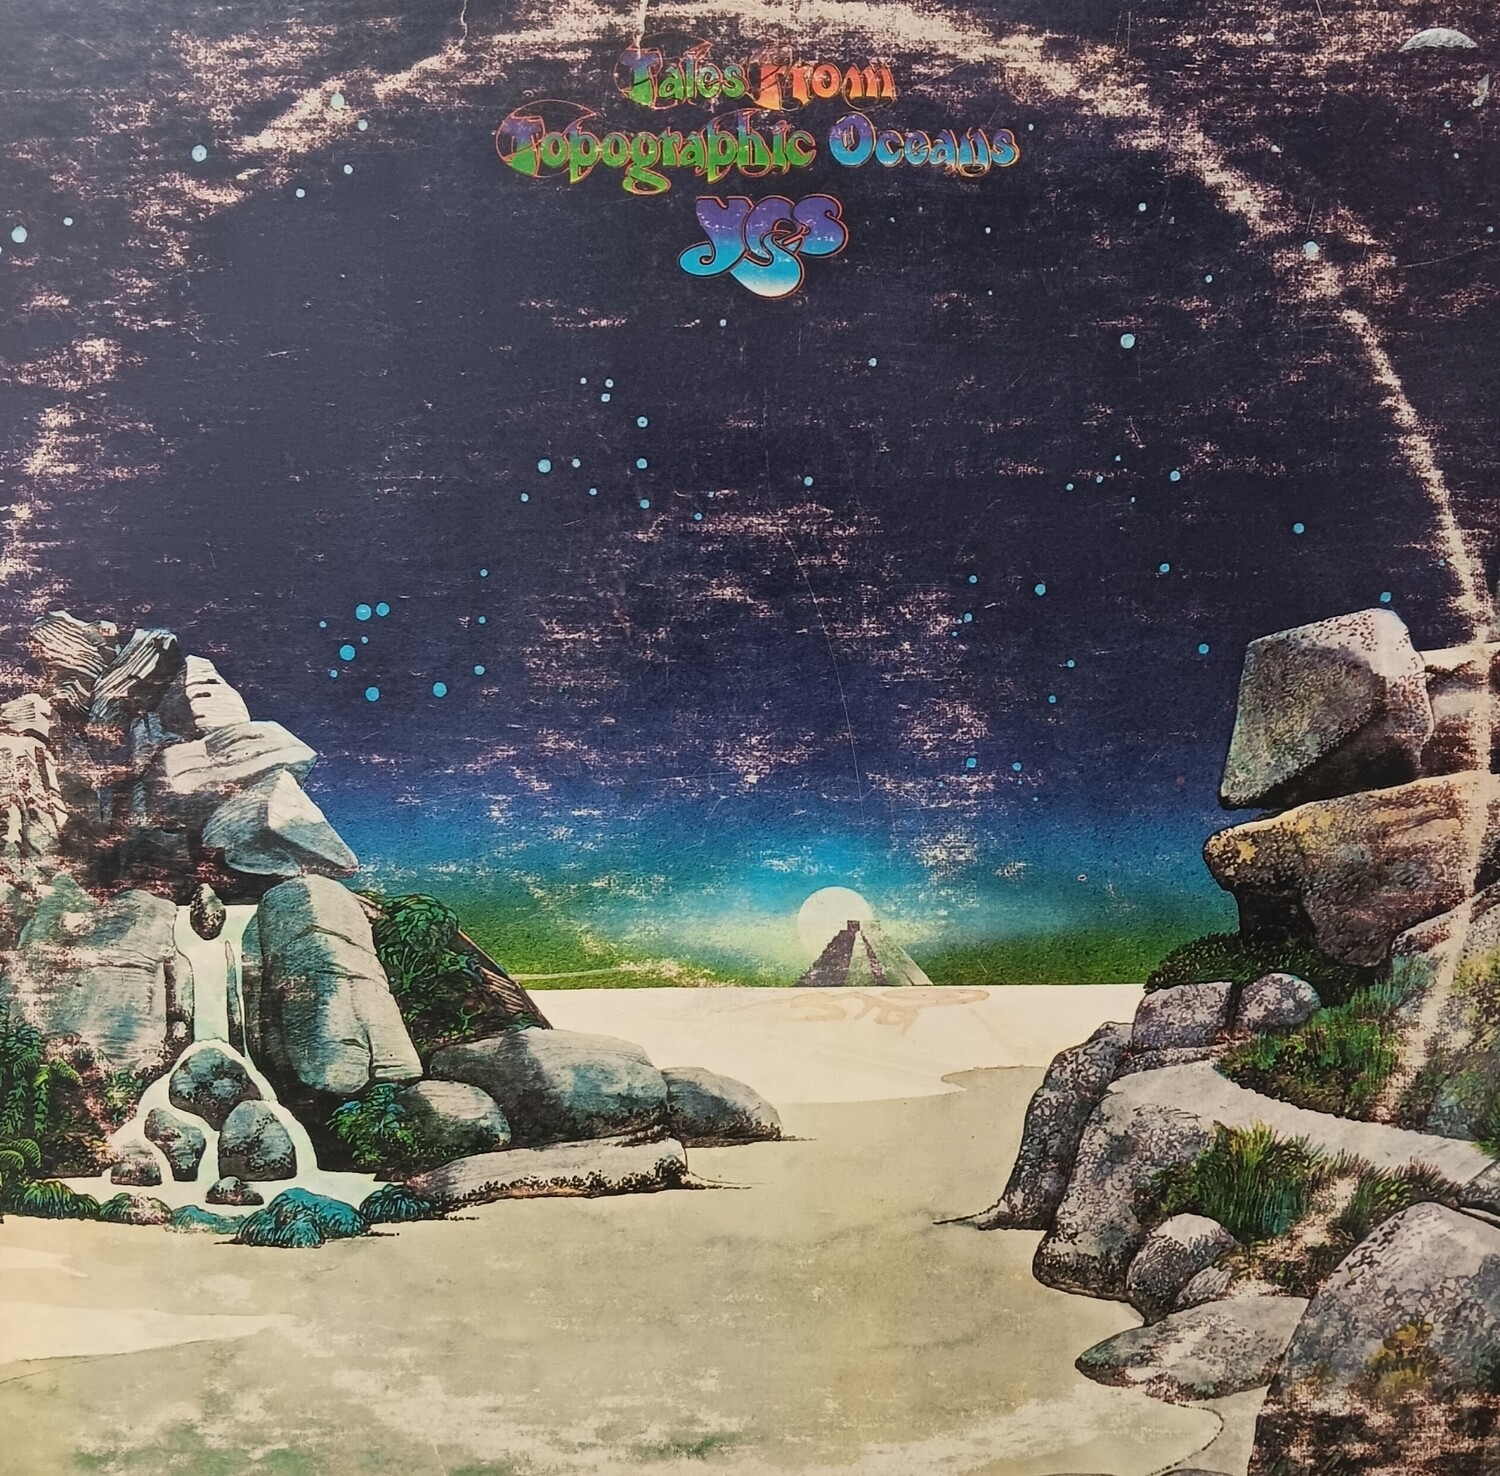 YES - Tales from topographic oceans